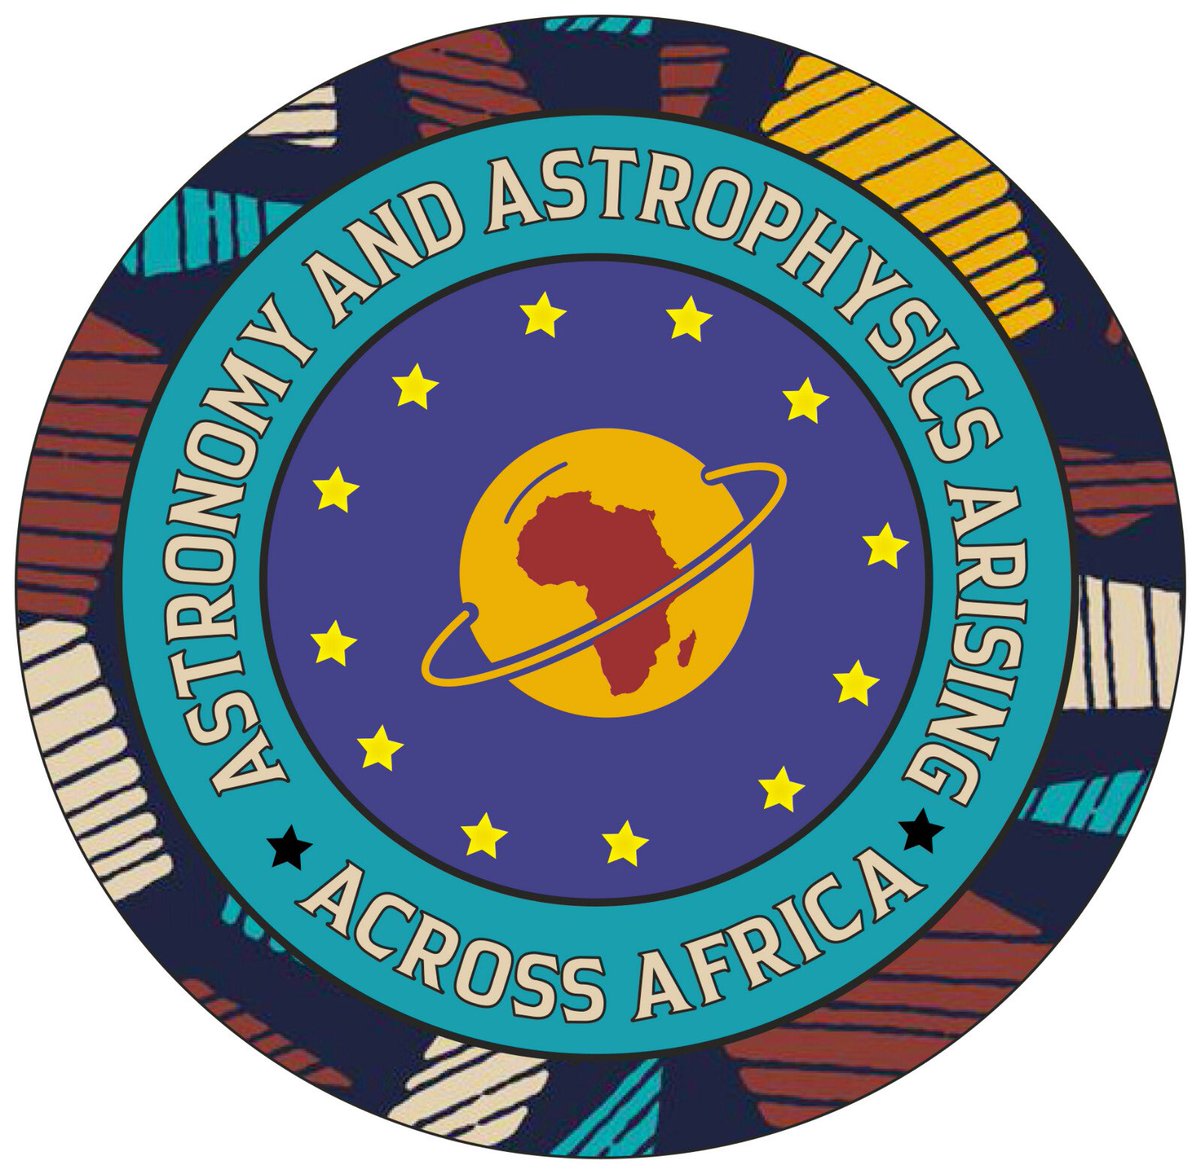 This the the goal of our "Astronomy and Astrophysics Arising Across Africa" (5A) project, hopefully to be funded by the European commision, to get Europeans and Africans working together, making research more inclusive.